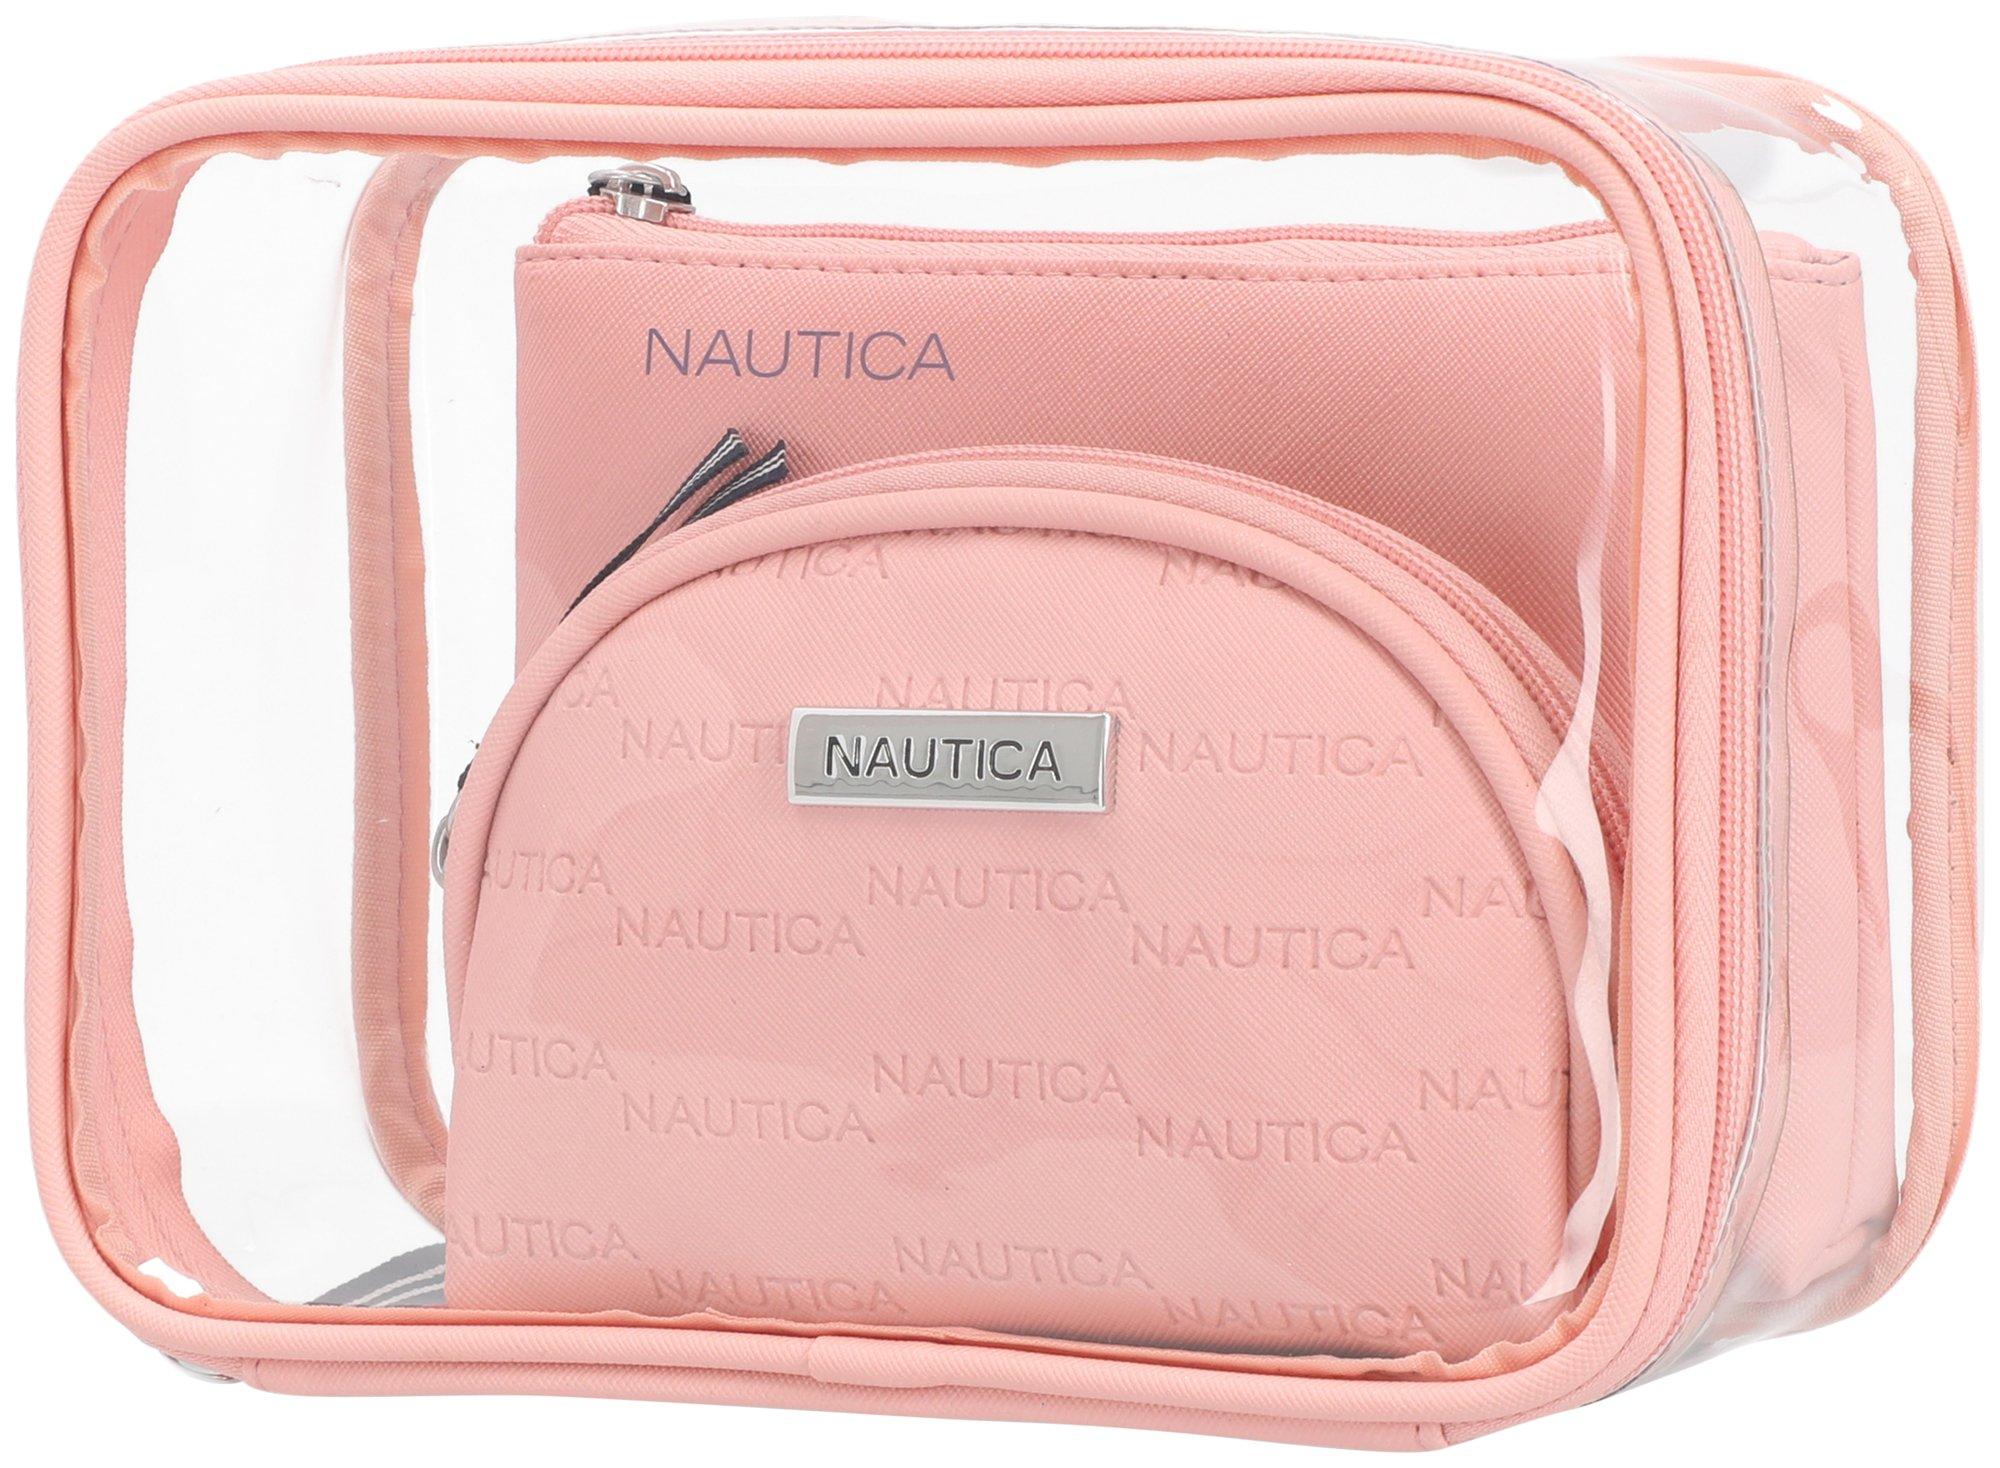 Nautica 3-Pc. Clear & Solid Cosmetic Case Set